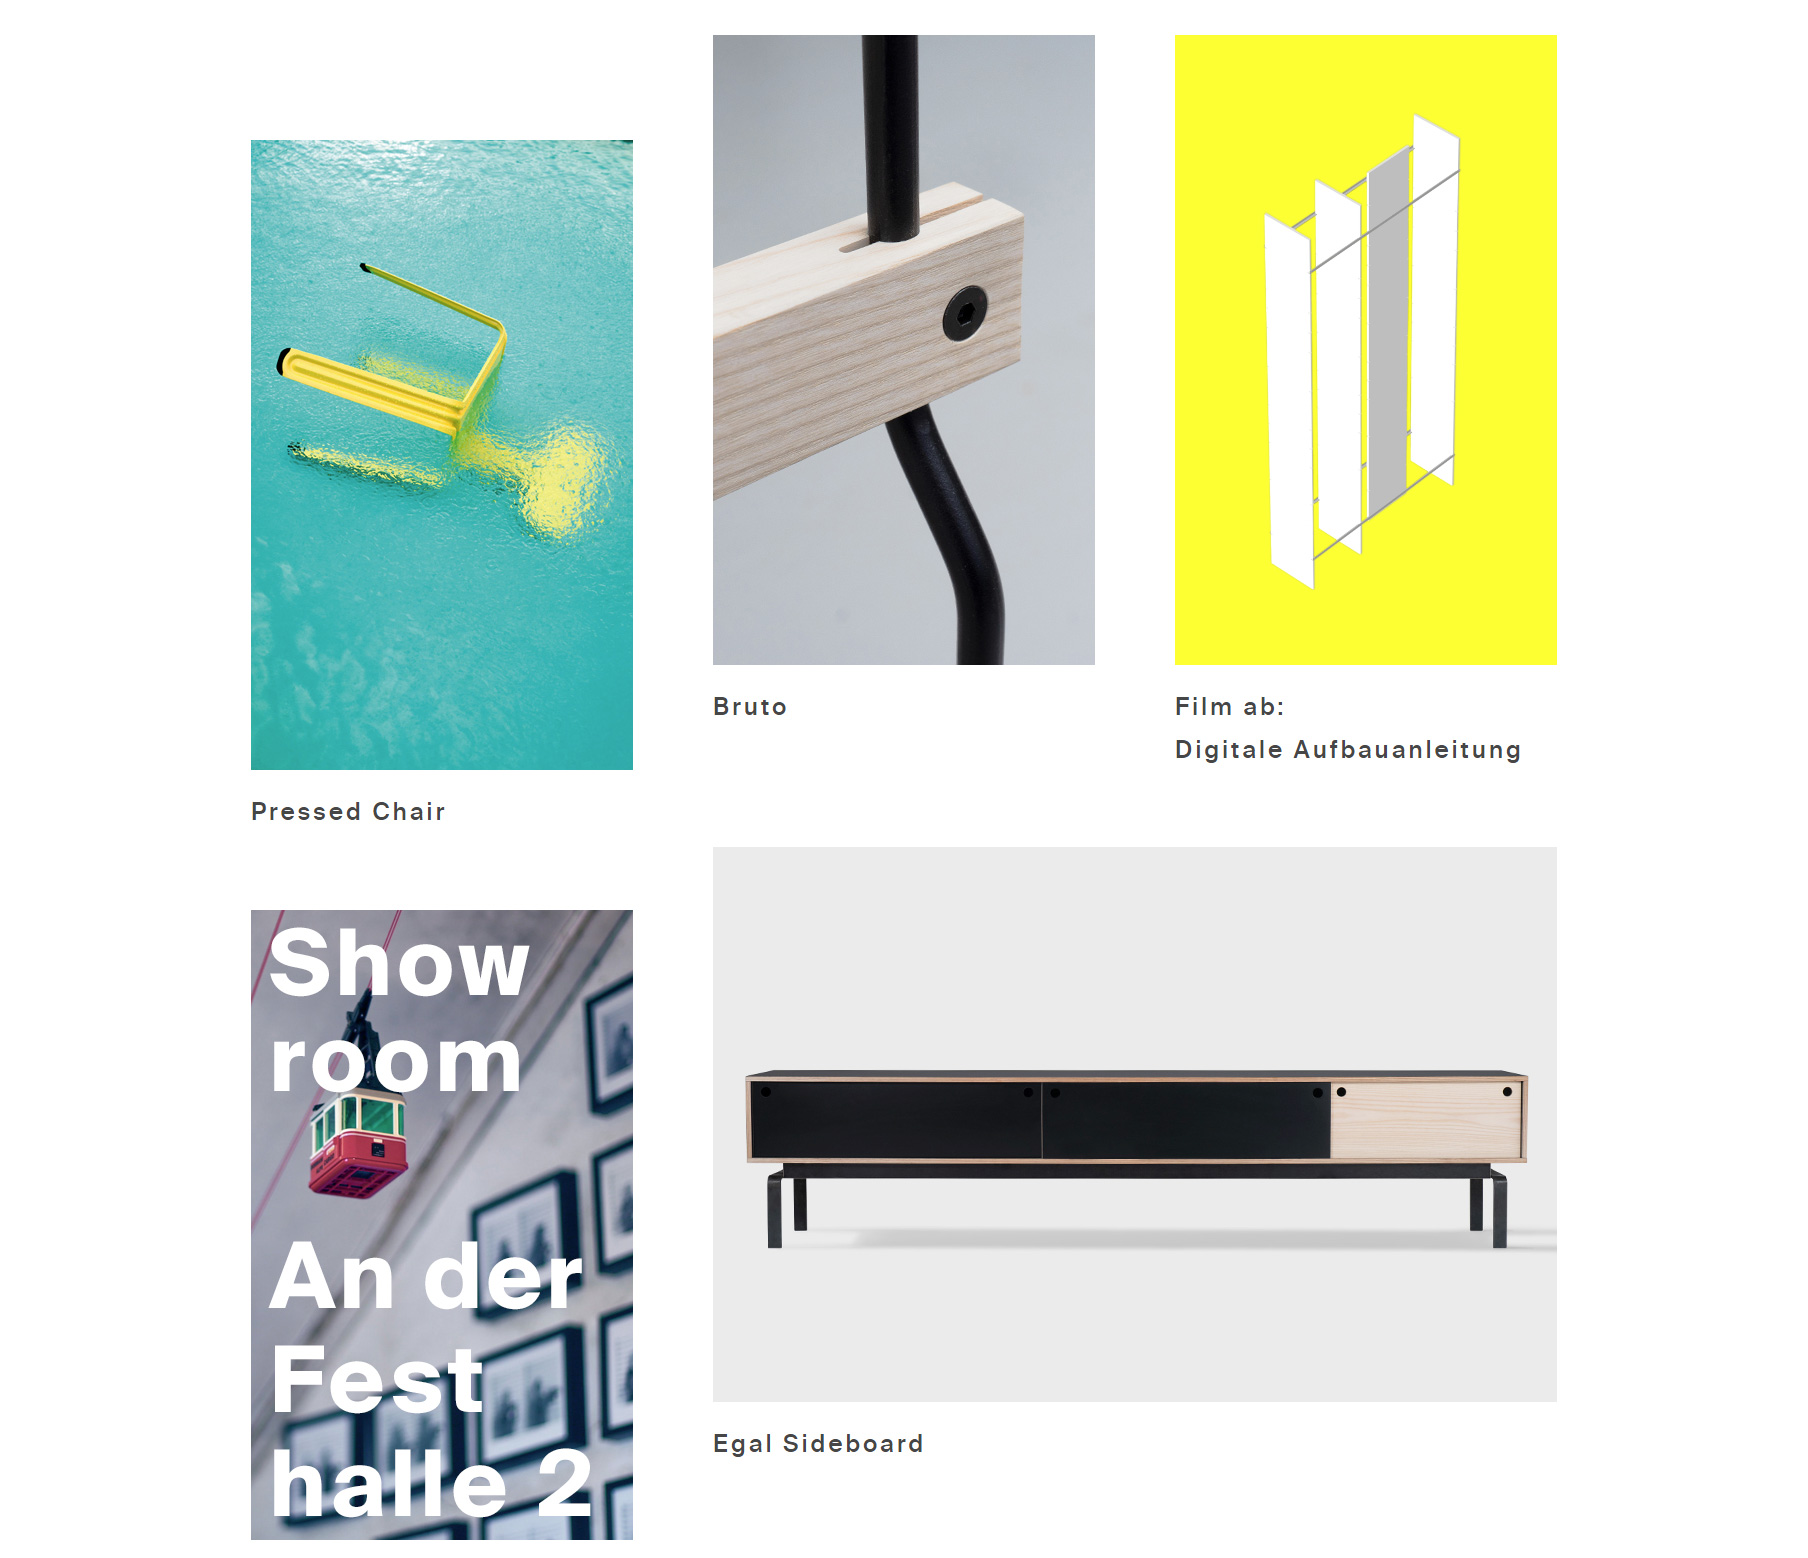 Nils Holger MOORMANN - Website of the Day